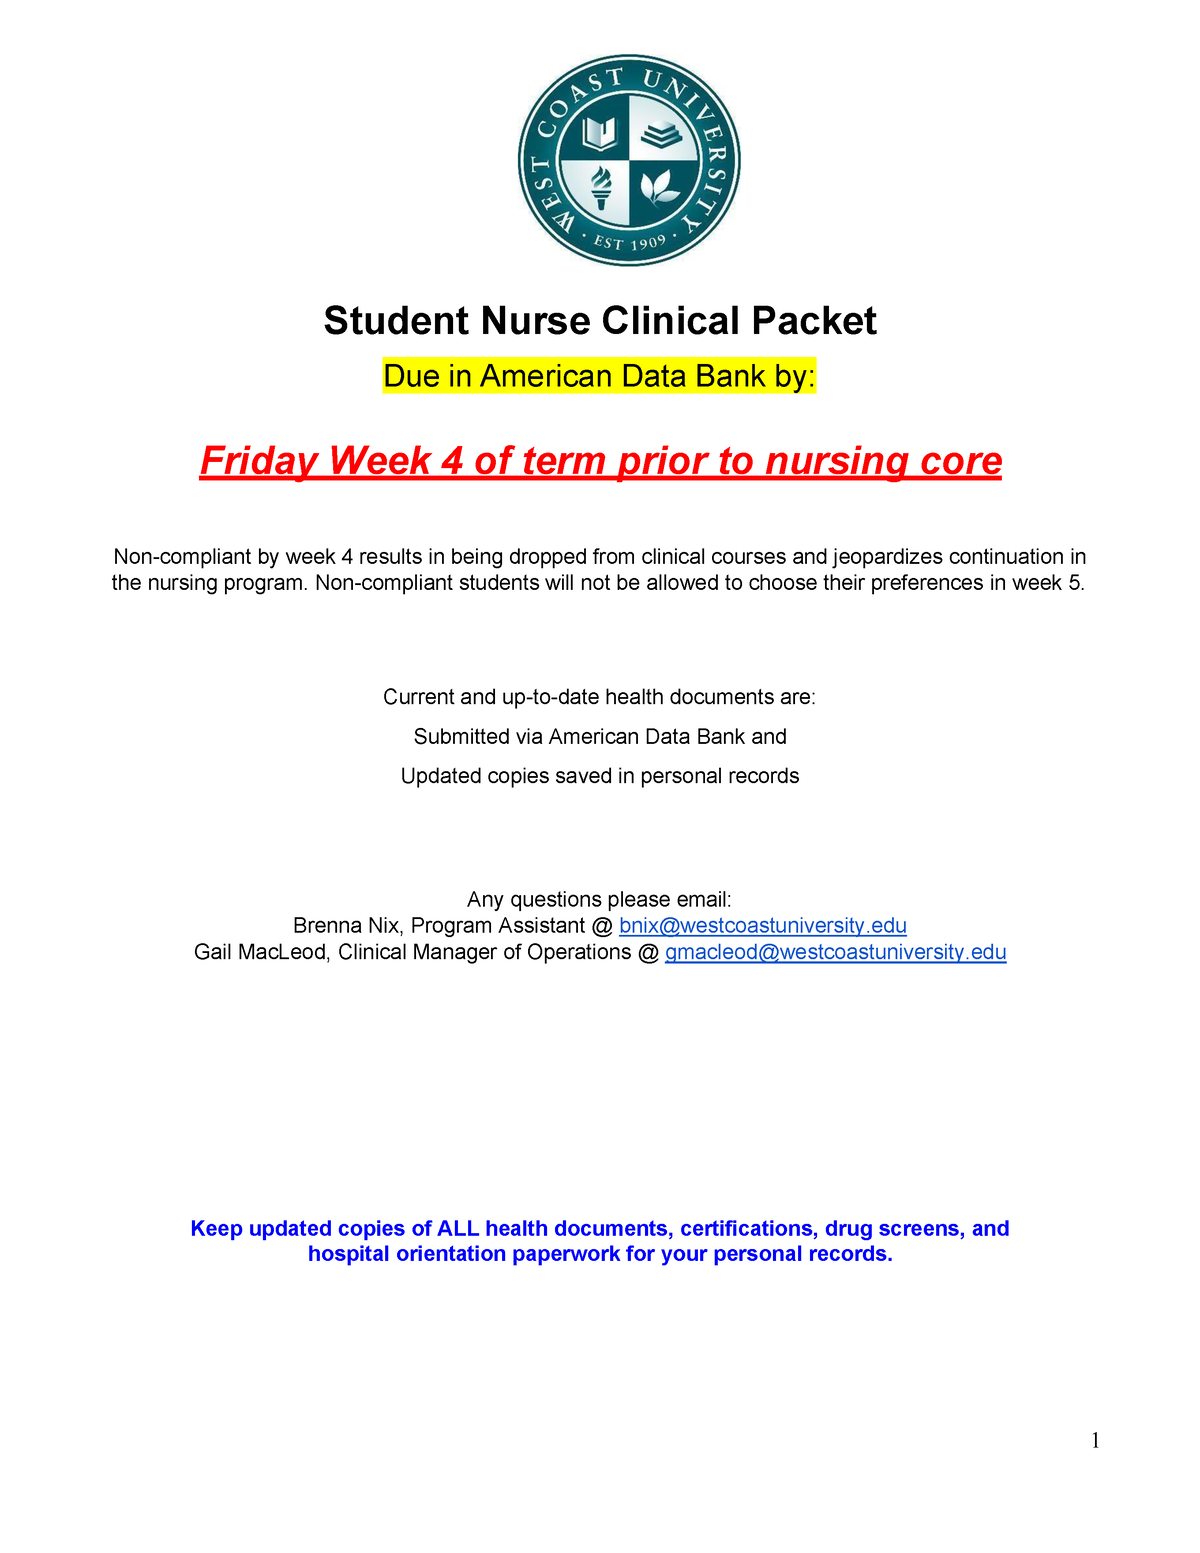 Student Nurse Clinical Packet 7 - Non-compliant students will not be